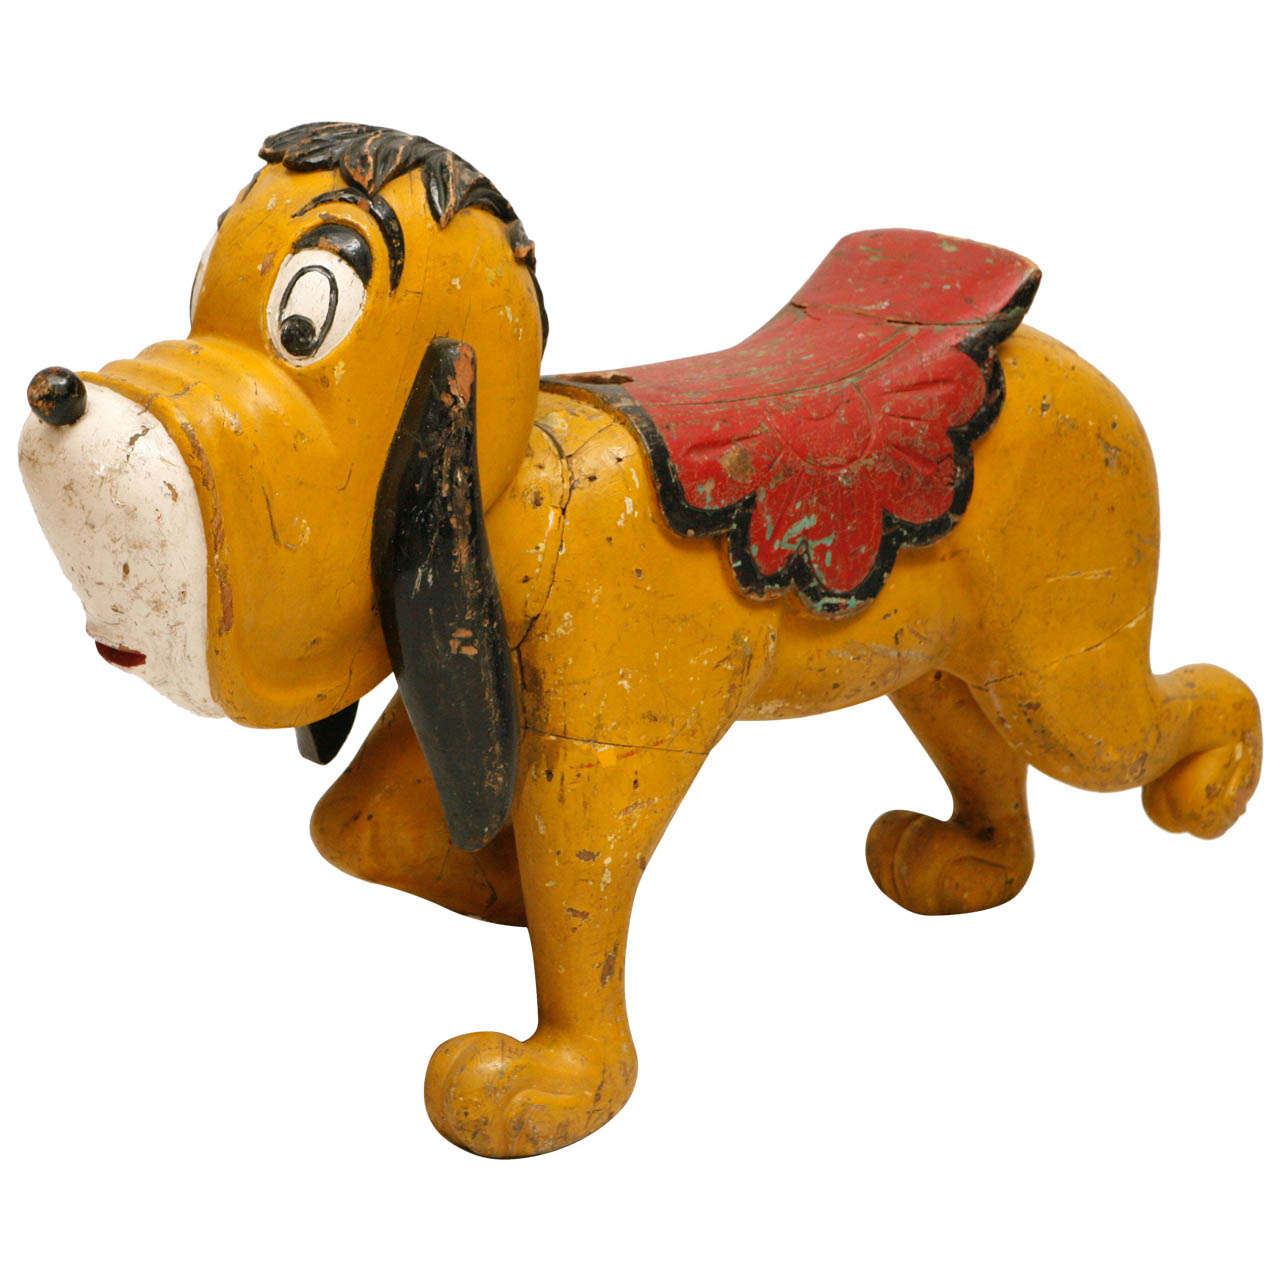 Droopy Carousel Animal / Horse